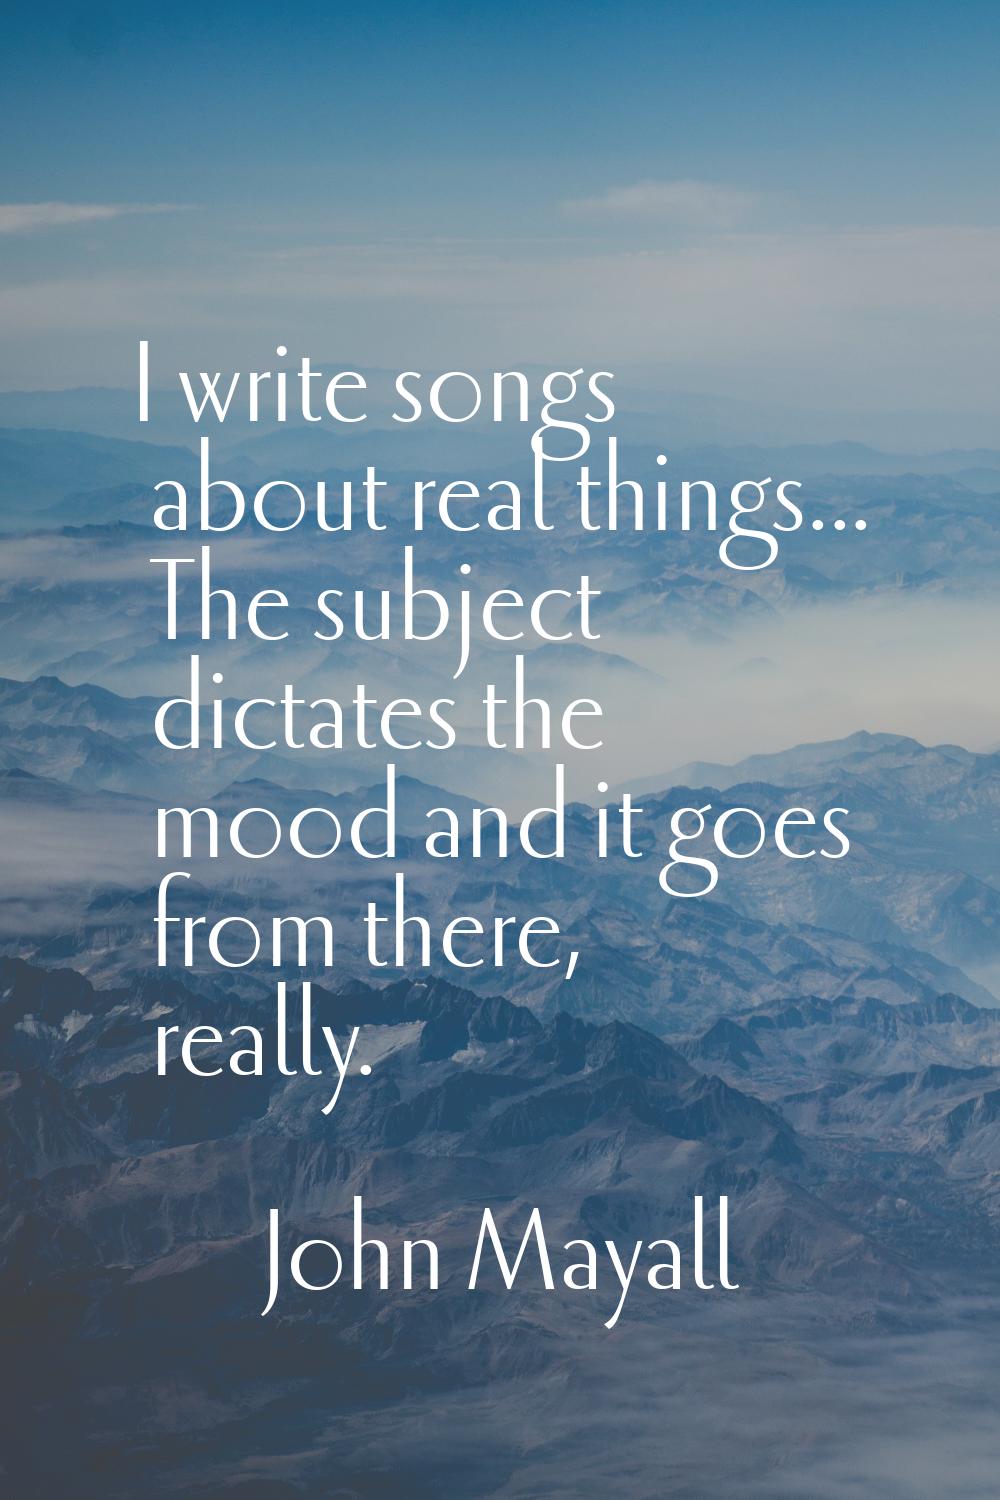 I write songs about real things... The subject dictates the mood and it goes from there, really.